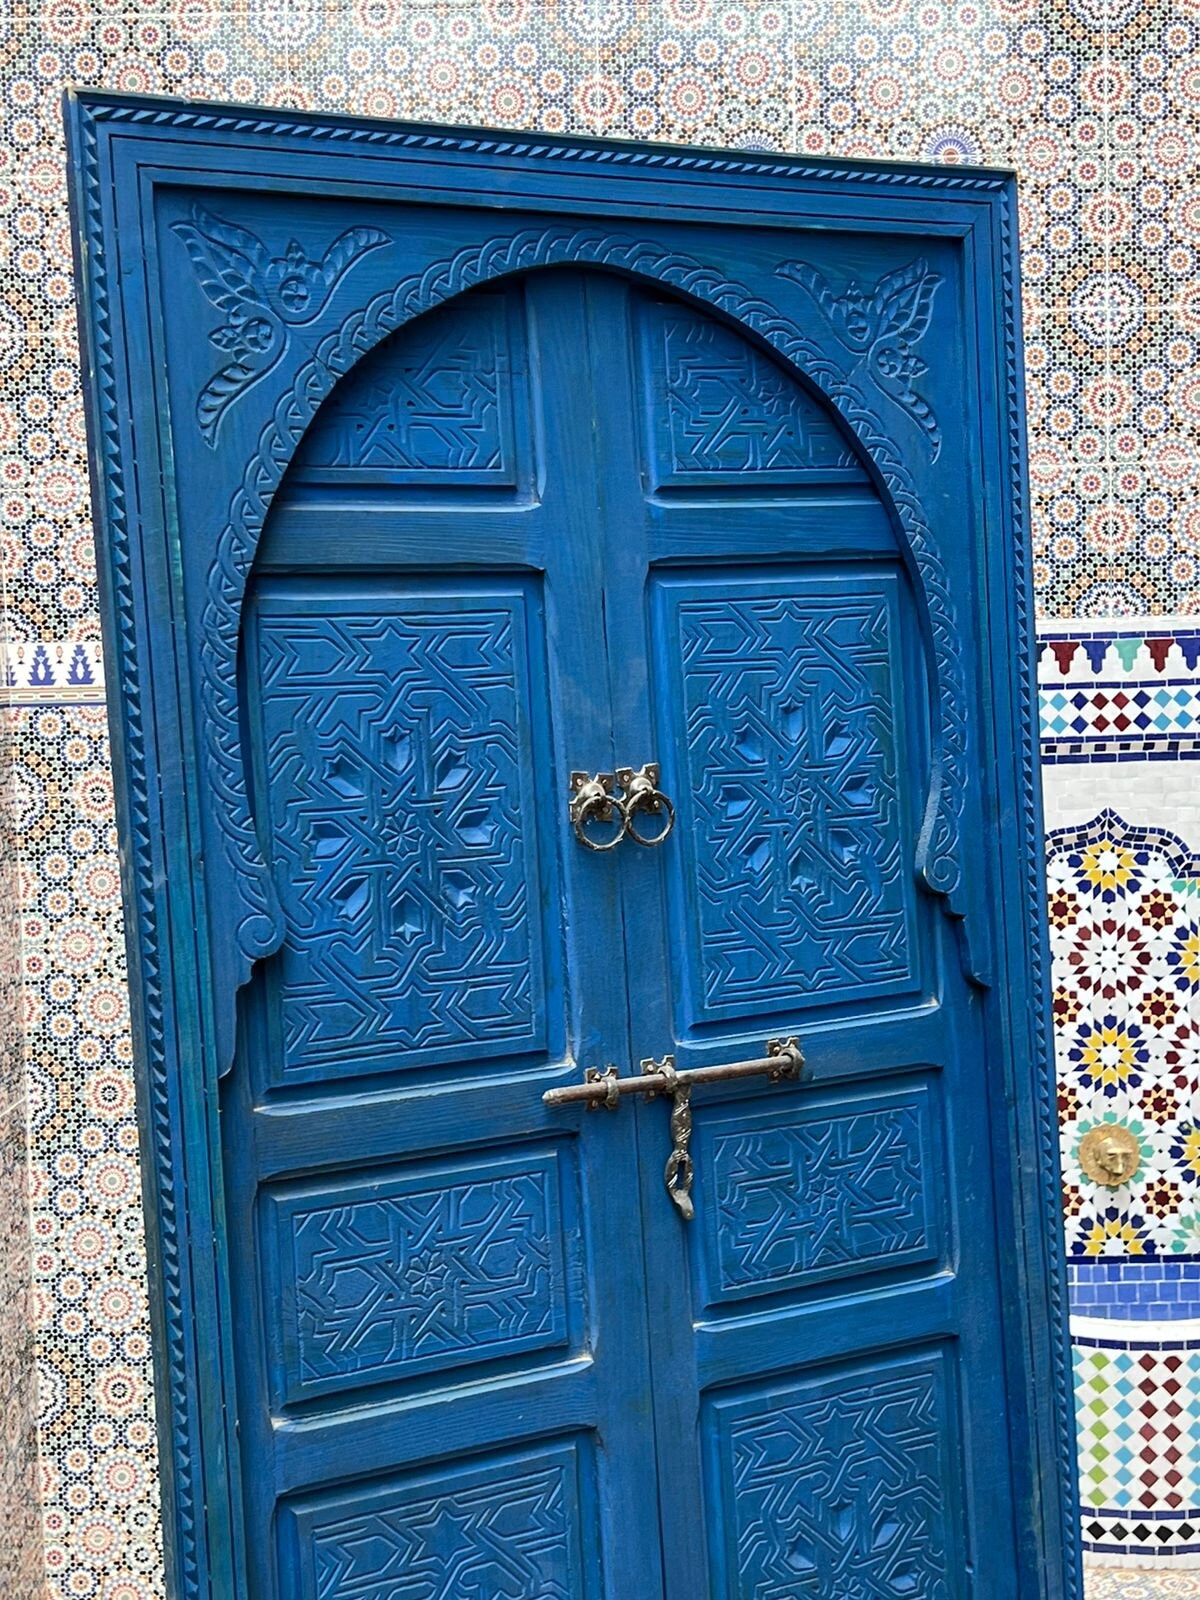 Wooden Carved Moroccan Door - Hand Painted, Distressed, Vintage, Antique, Blue Wooden Large Door Crafted with Best Quality of Wood